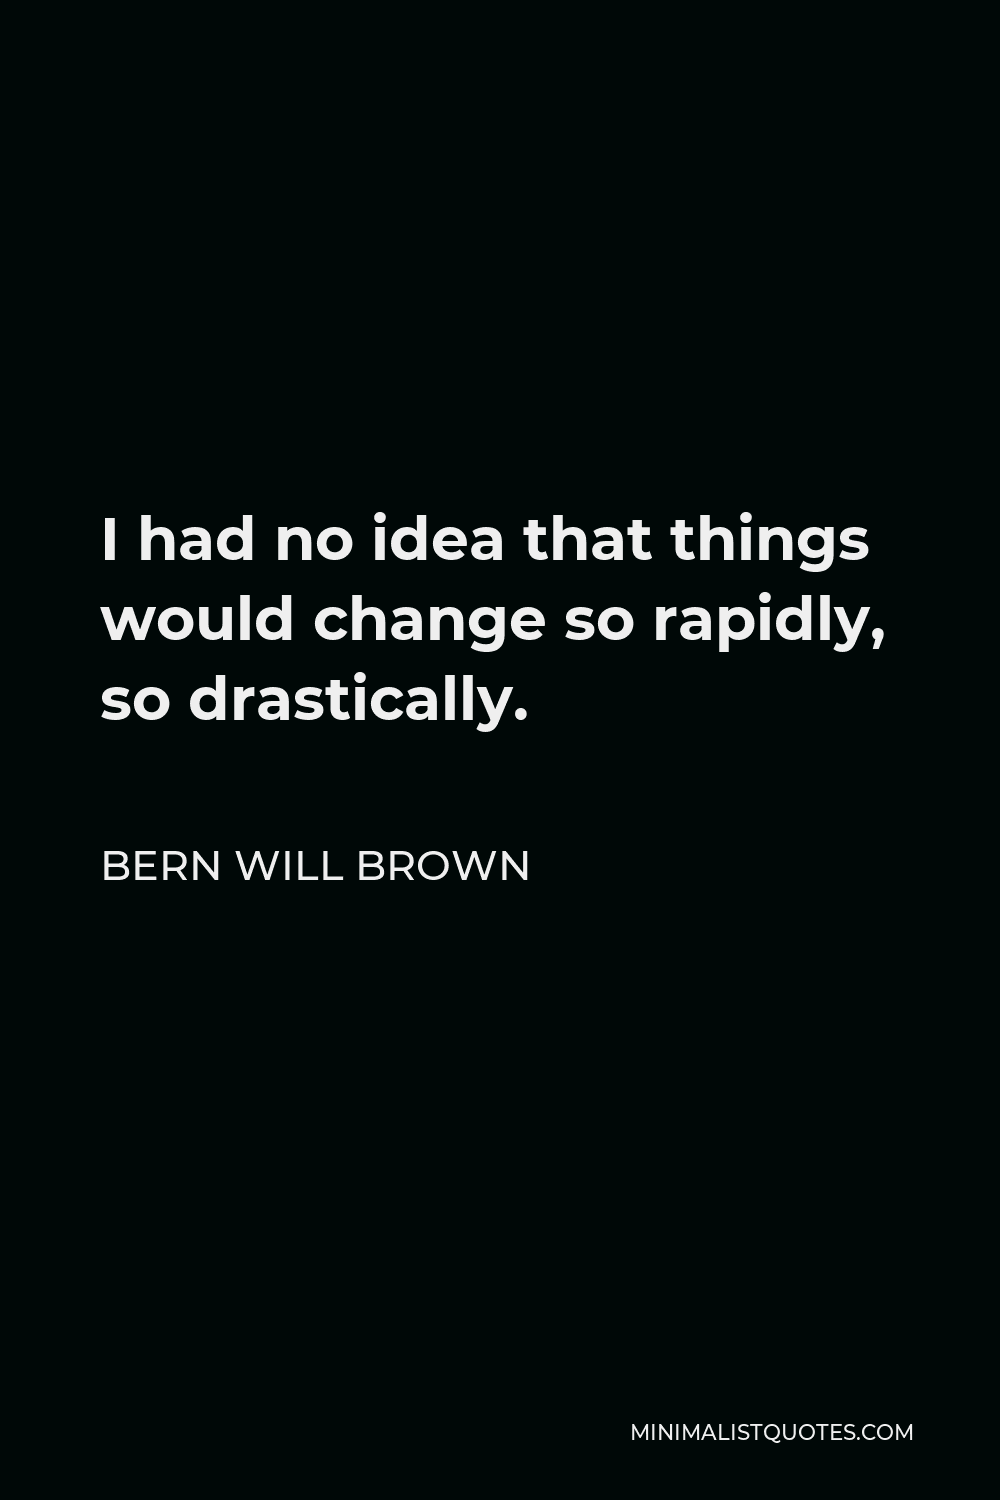 Bern Will Brown Quote - I had no idea that things would change so rapidly, so drastically.